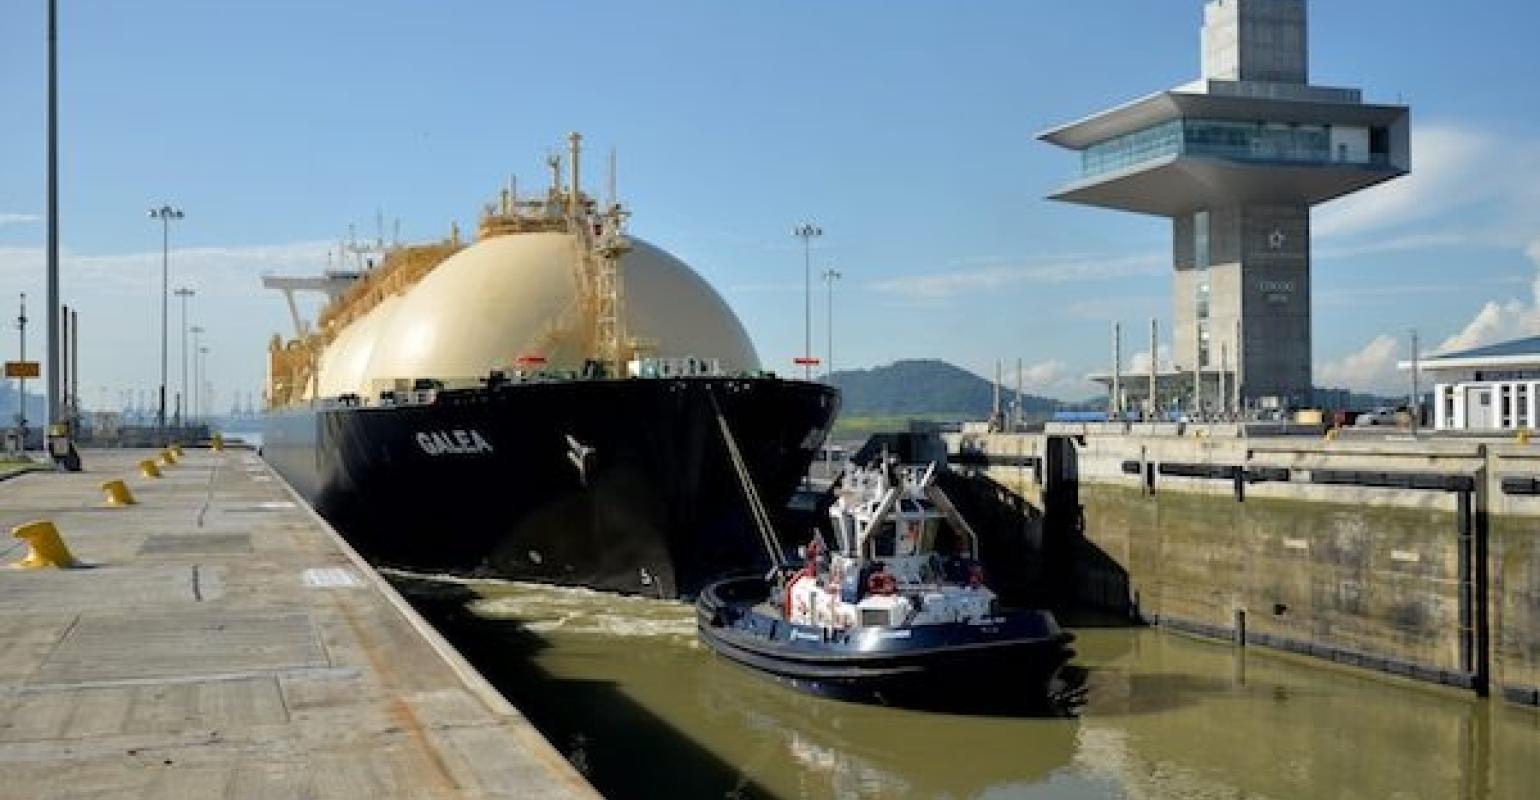 Panama Canal lifts restrictions for LNG transits Seatrade Maritime